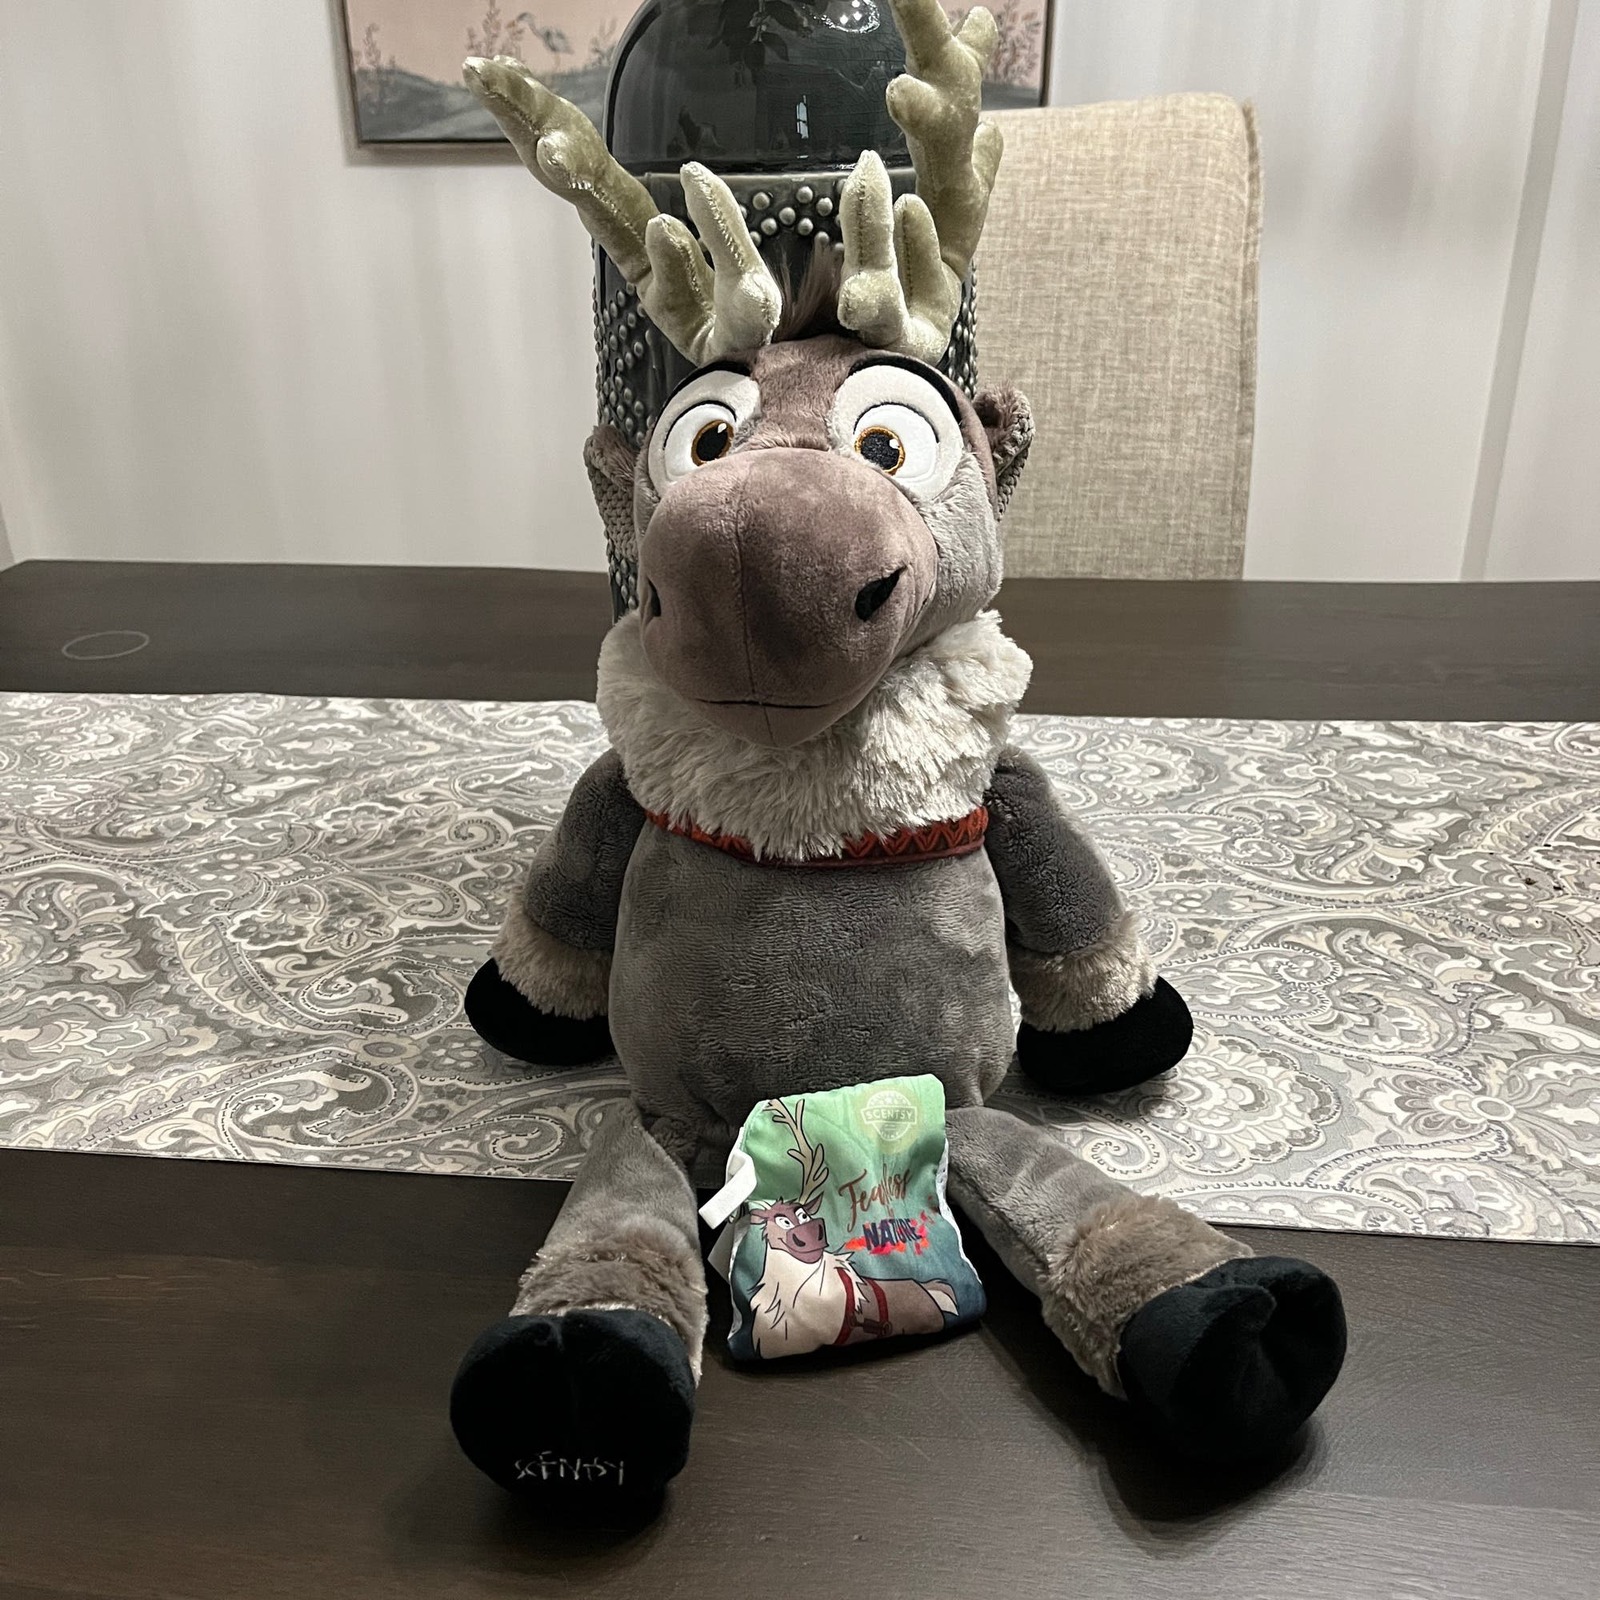 Scentsy Buddy Disney Frozen Sven & Fearless by Nature Scent Pak - $48.37